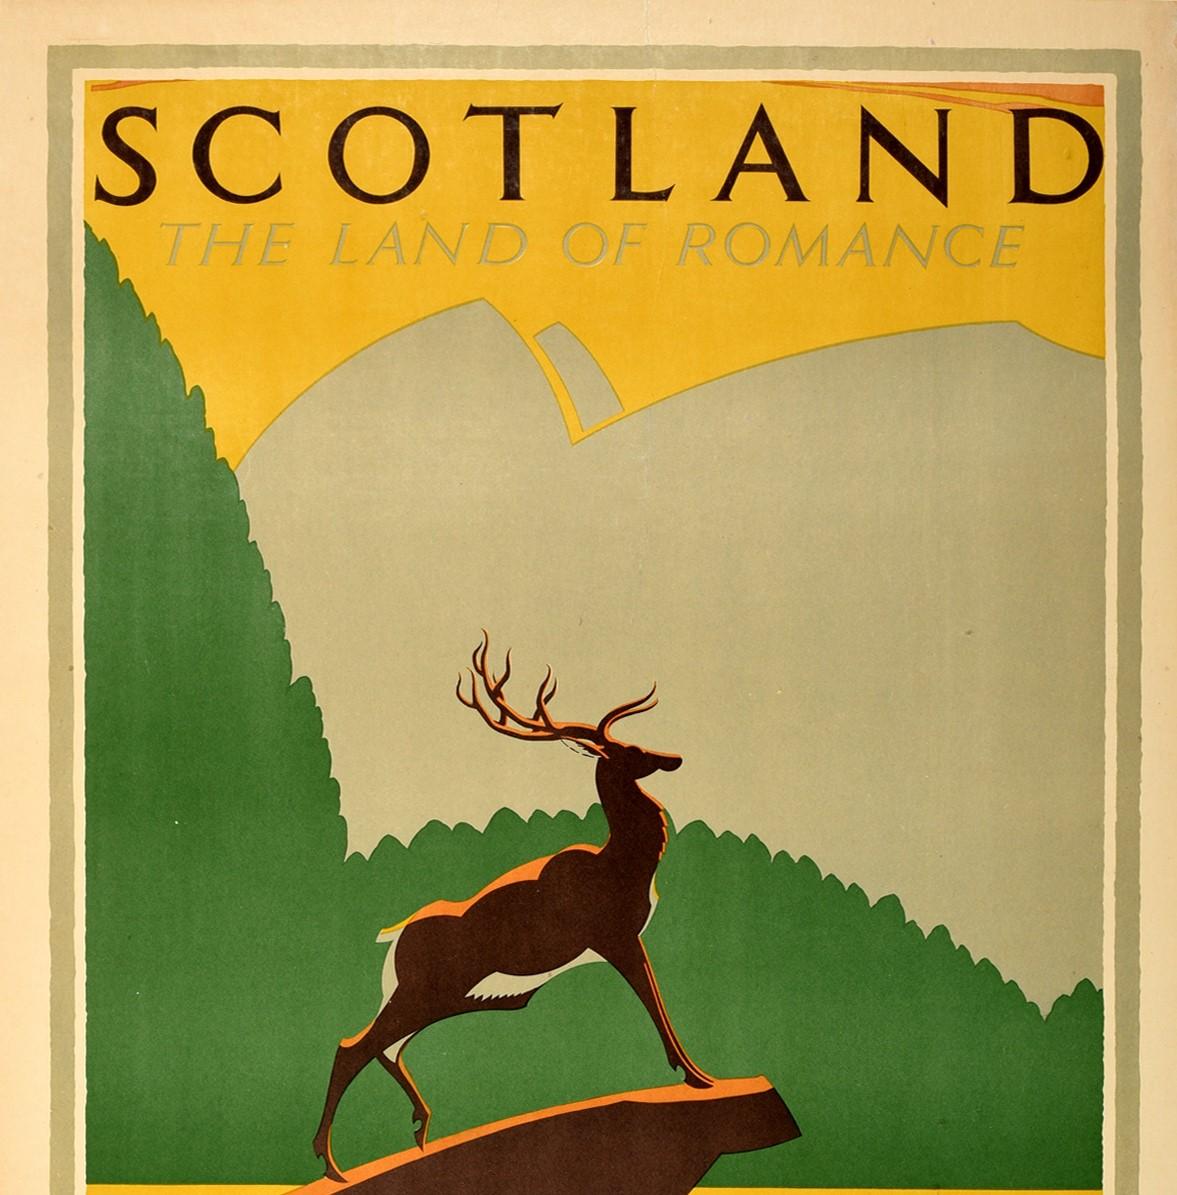 Original Vintage Travel Poster Scotland The Land Of Romance Anchor Line Shipping - Print by Frederick Charles Herrick